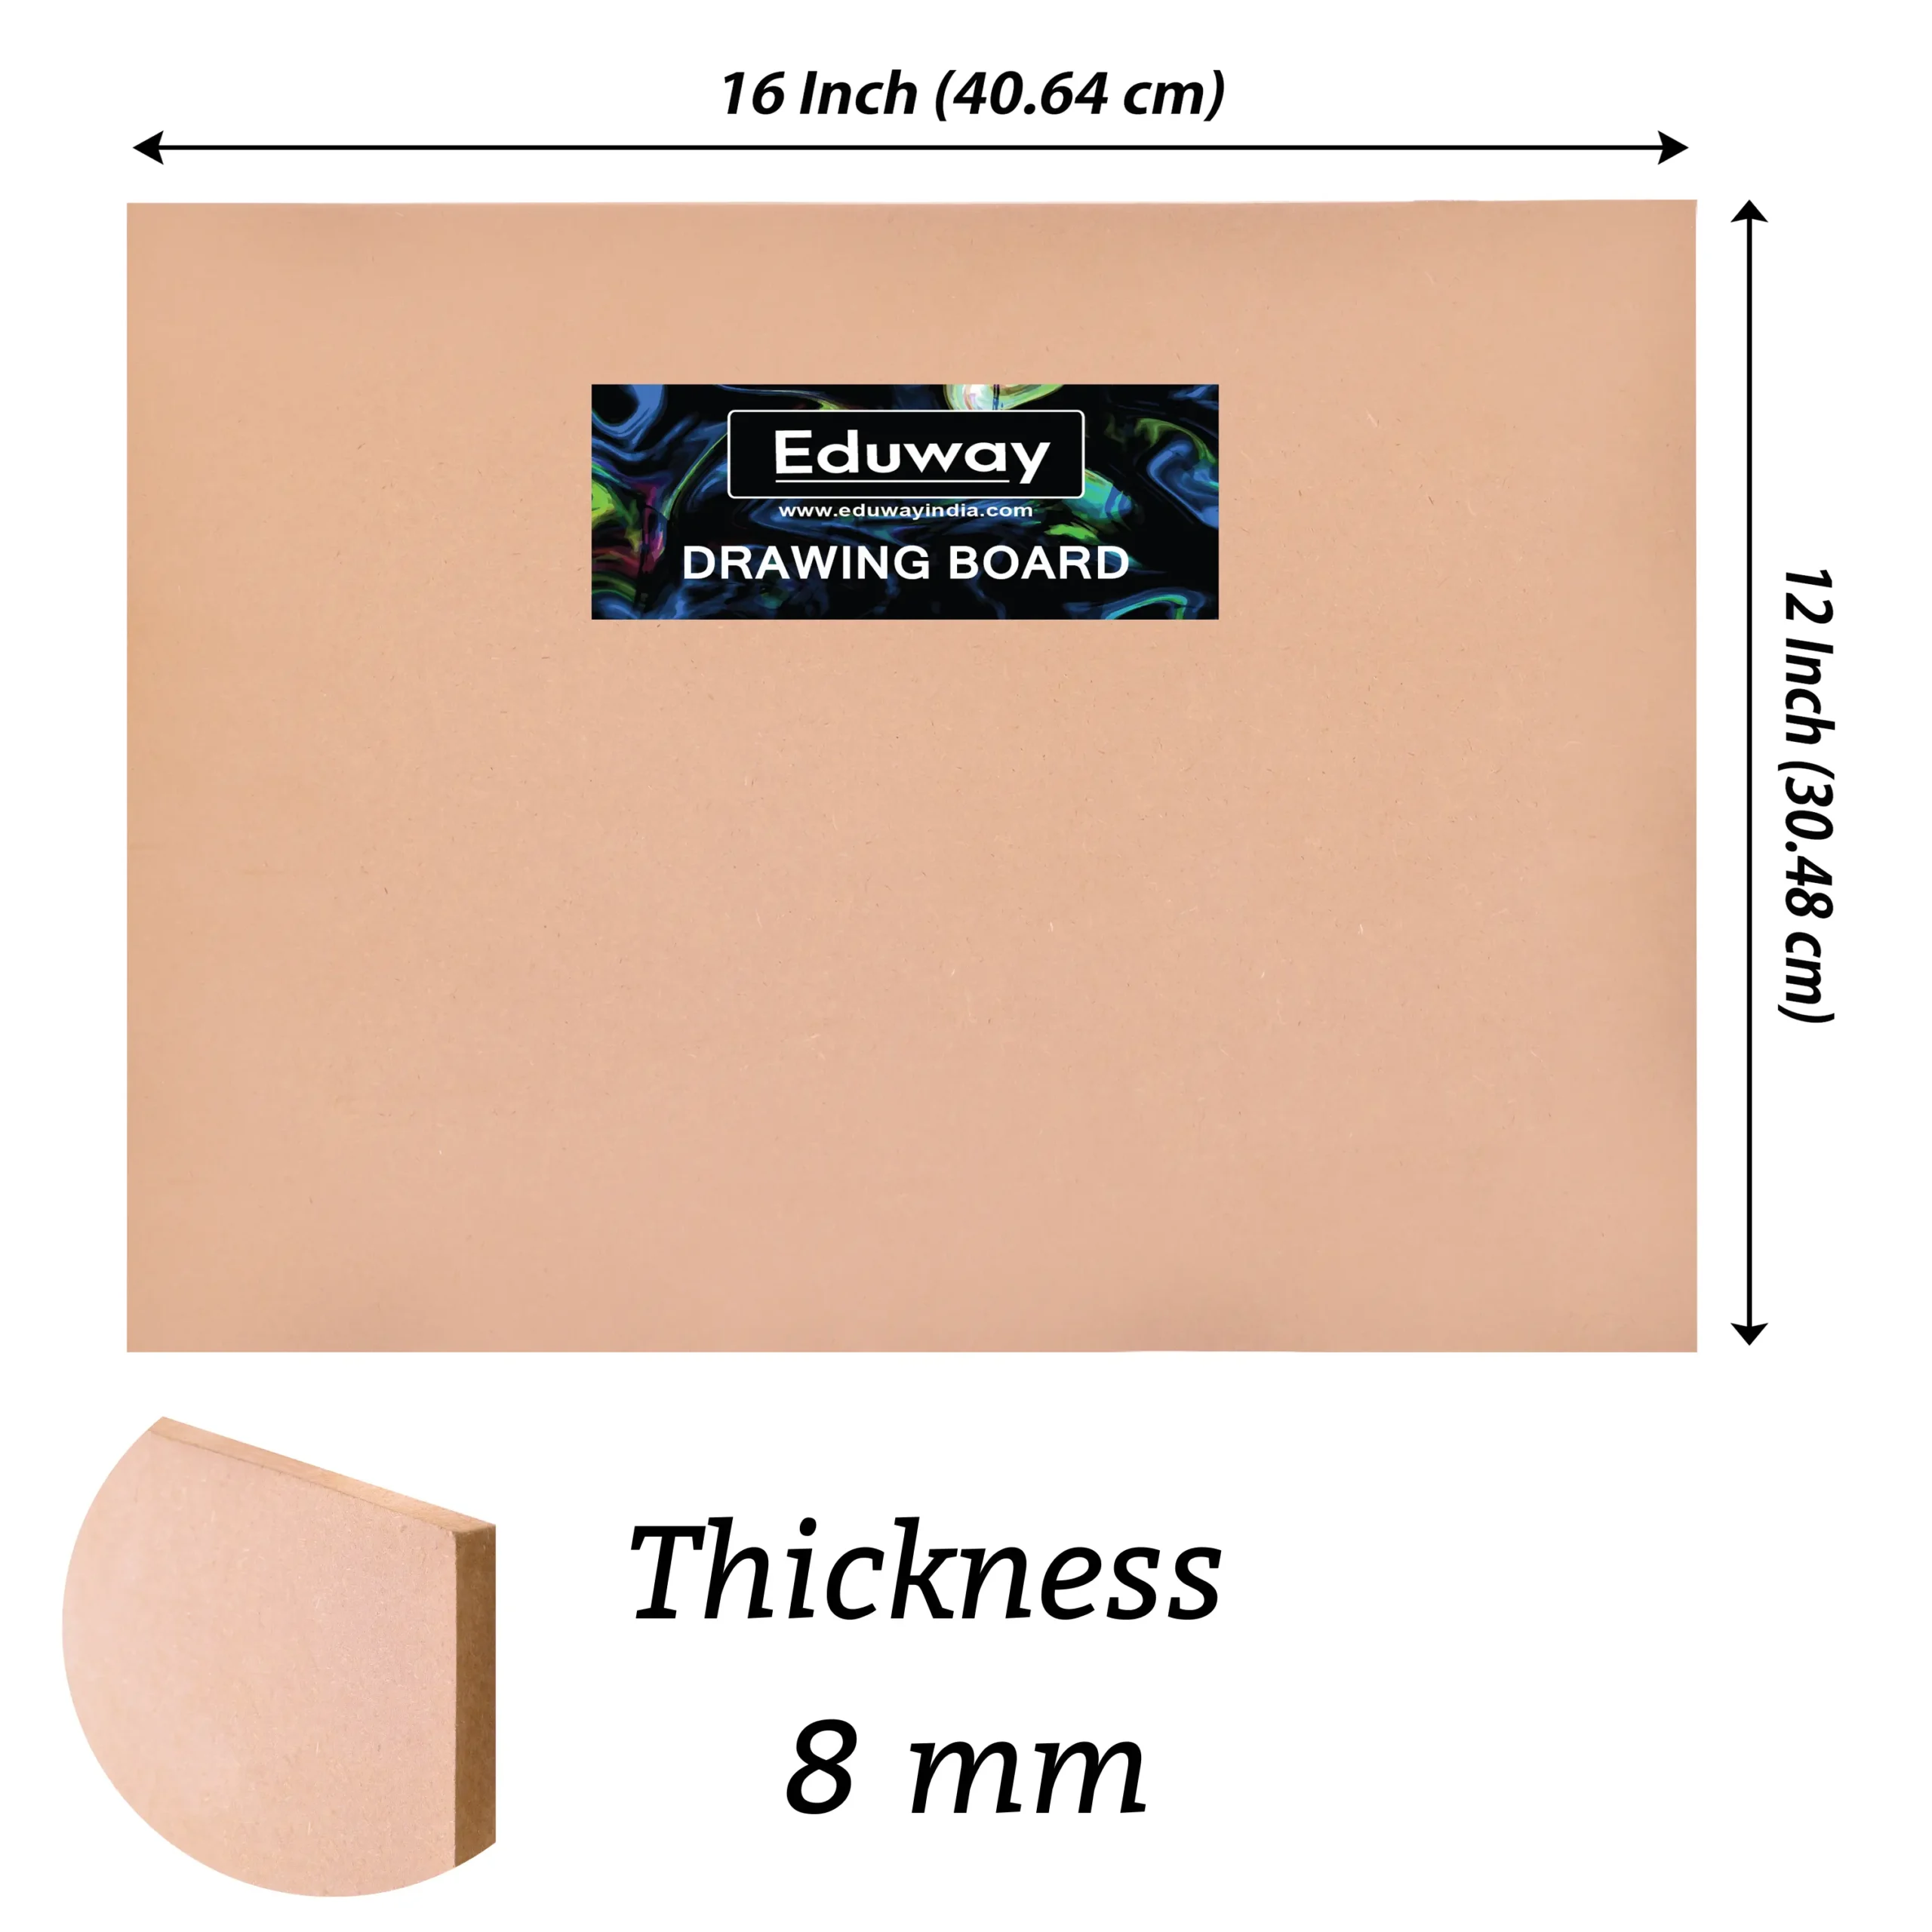 Buy 11mm MDF Drawing Board For Engineers at Best Prices